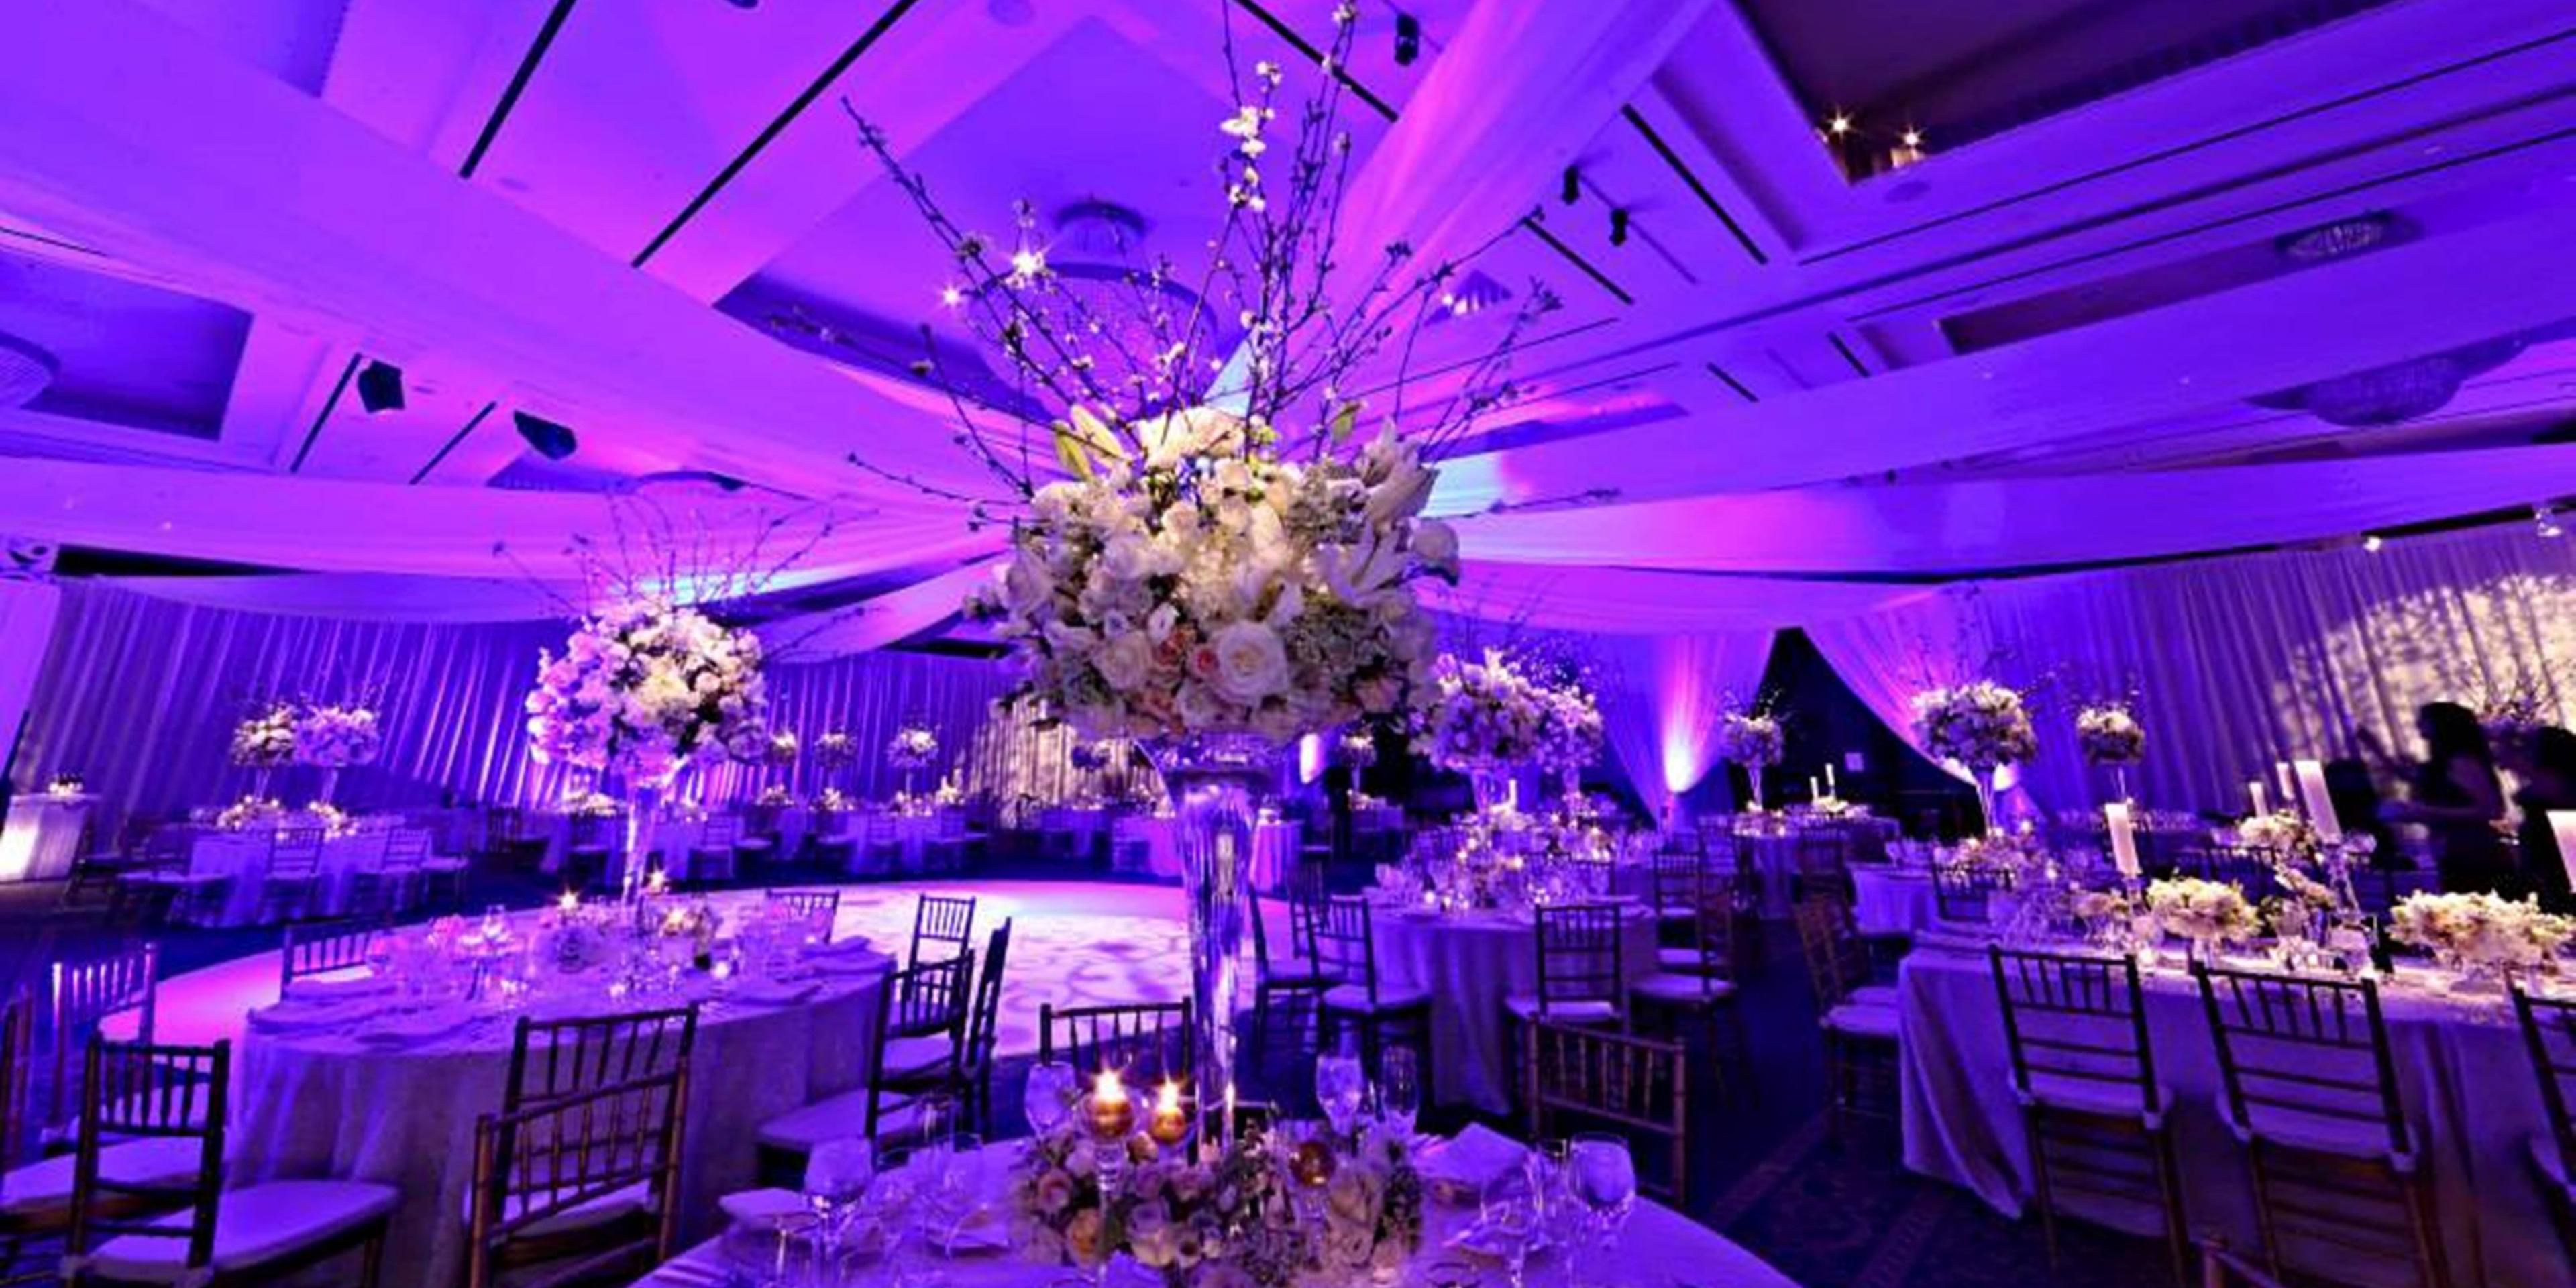 Our sophisticated event space serves as a backdrop to Cleveland’s most exquisite weddings. With an elegant ballroom, glittering chandeliers, and delectable dining, our venue is the glamorous destination for the day of your dreams. Let our dedicated team make your special day unforgettable.
